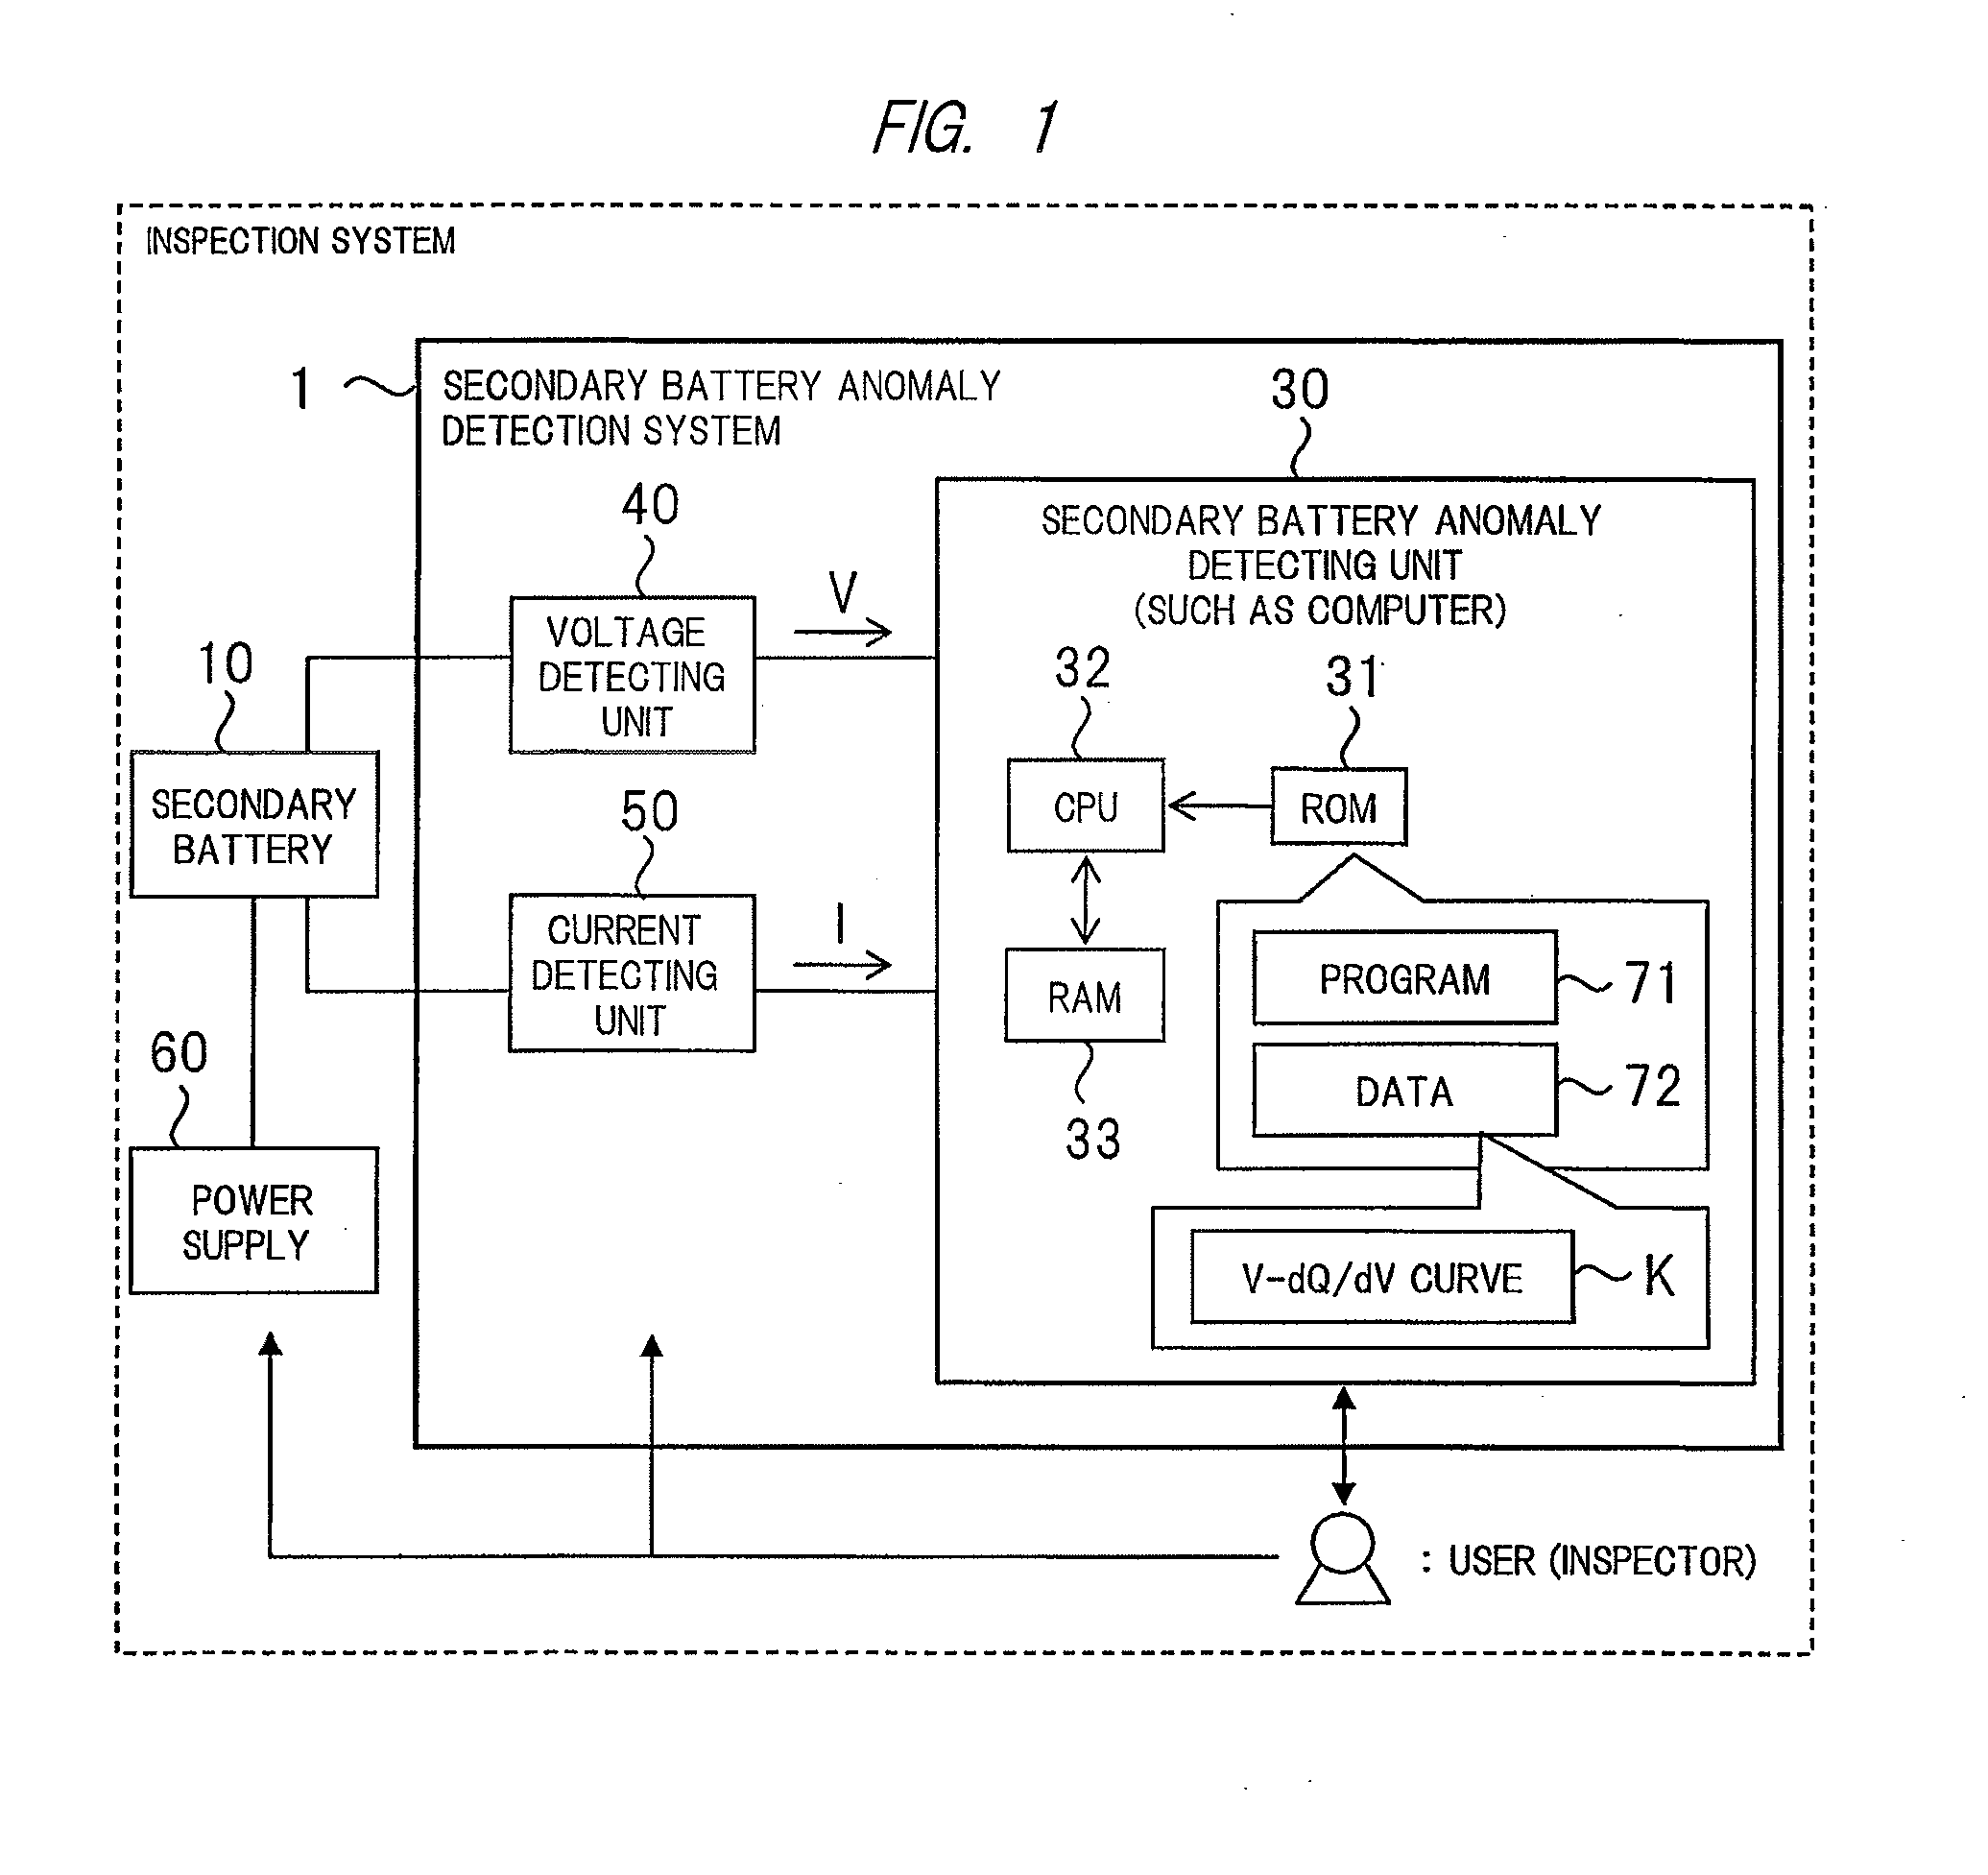 Inspection System, Charger/Discharger, and Inspection Method of Secondary Battery